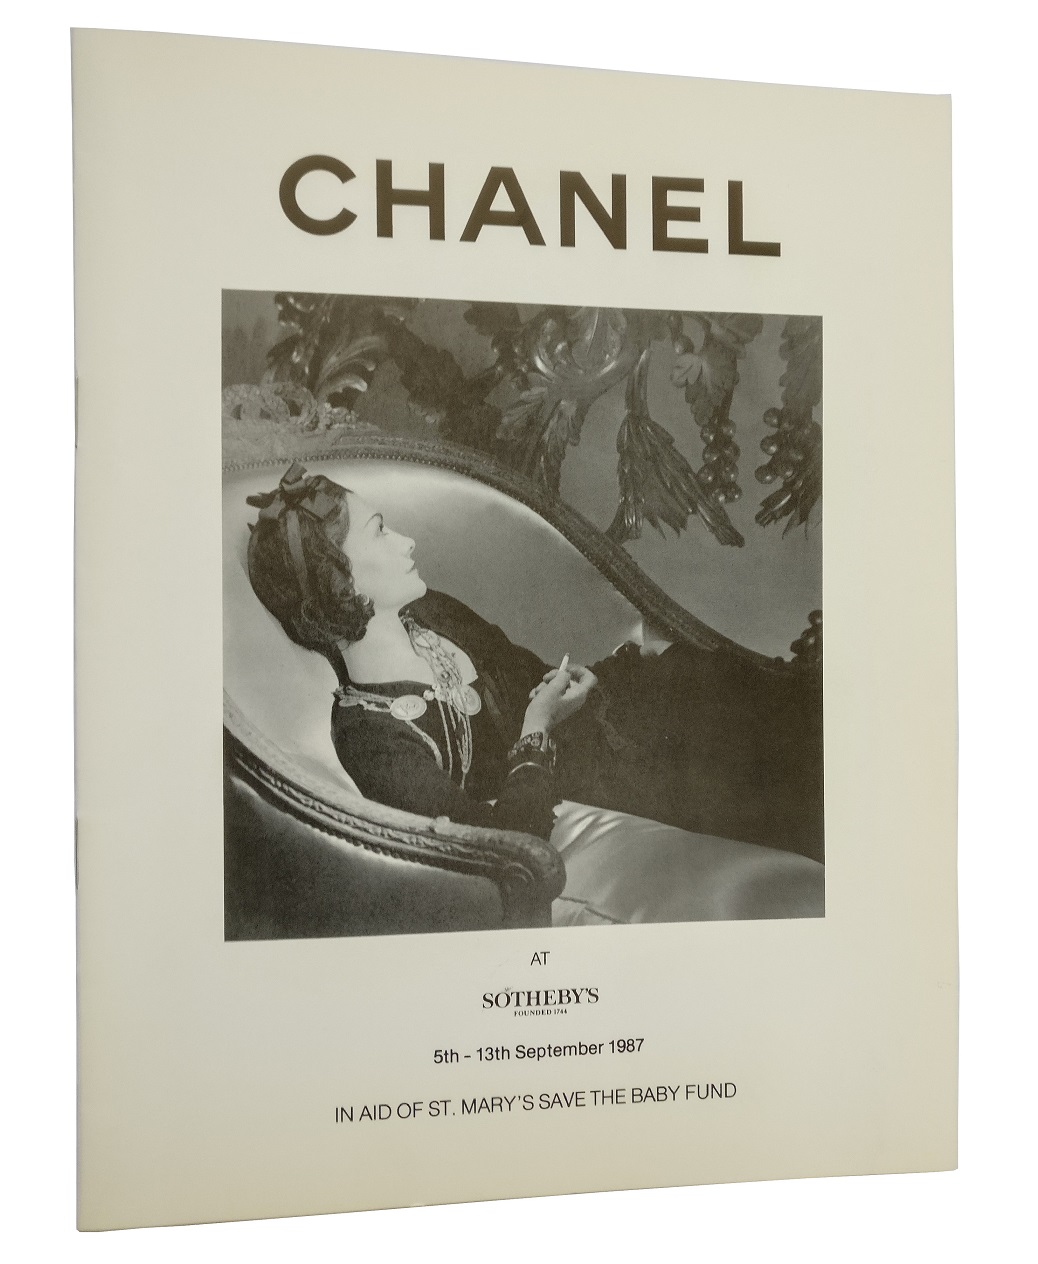 Chanel at Sotheby's in aid of St. Mary's Save the Baby Fund